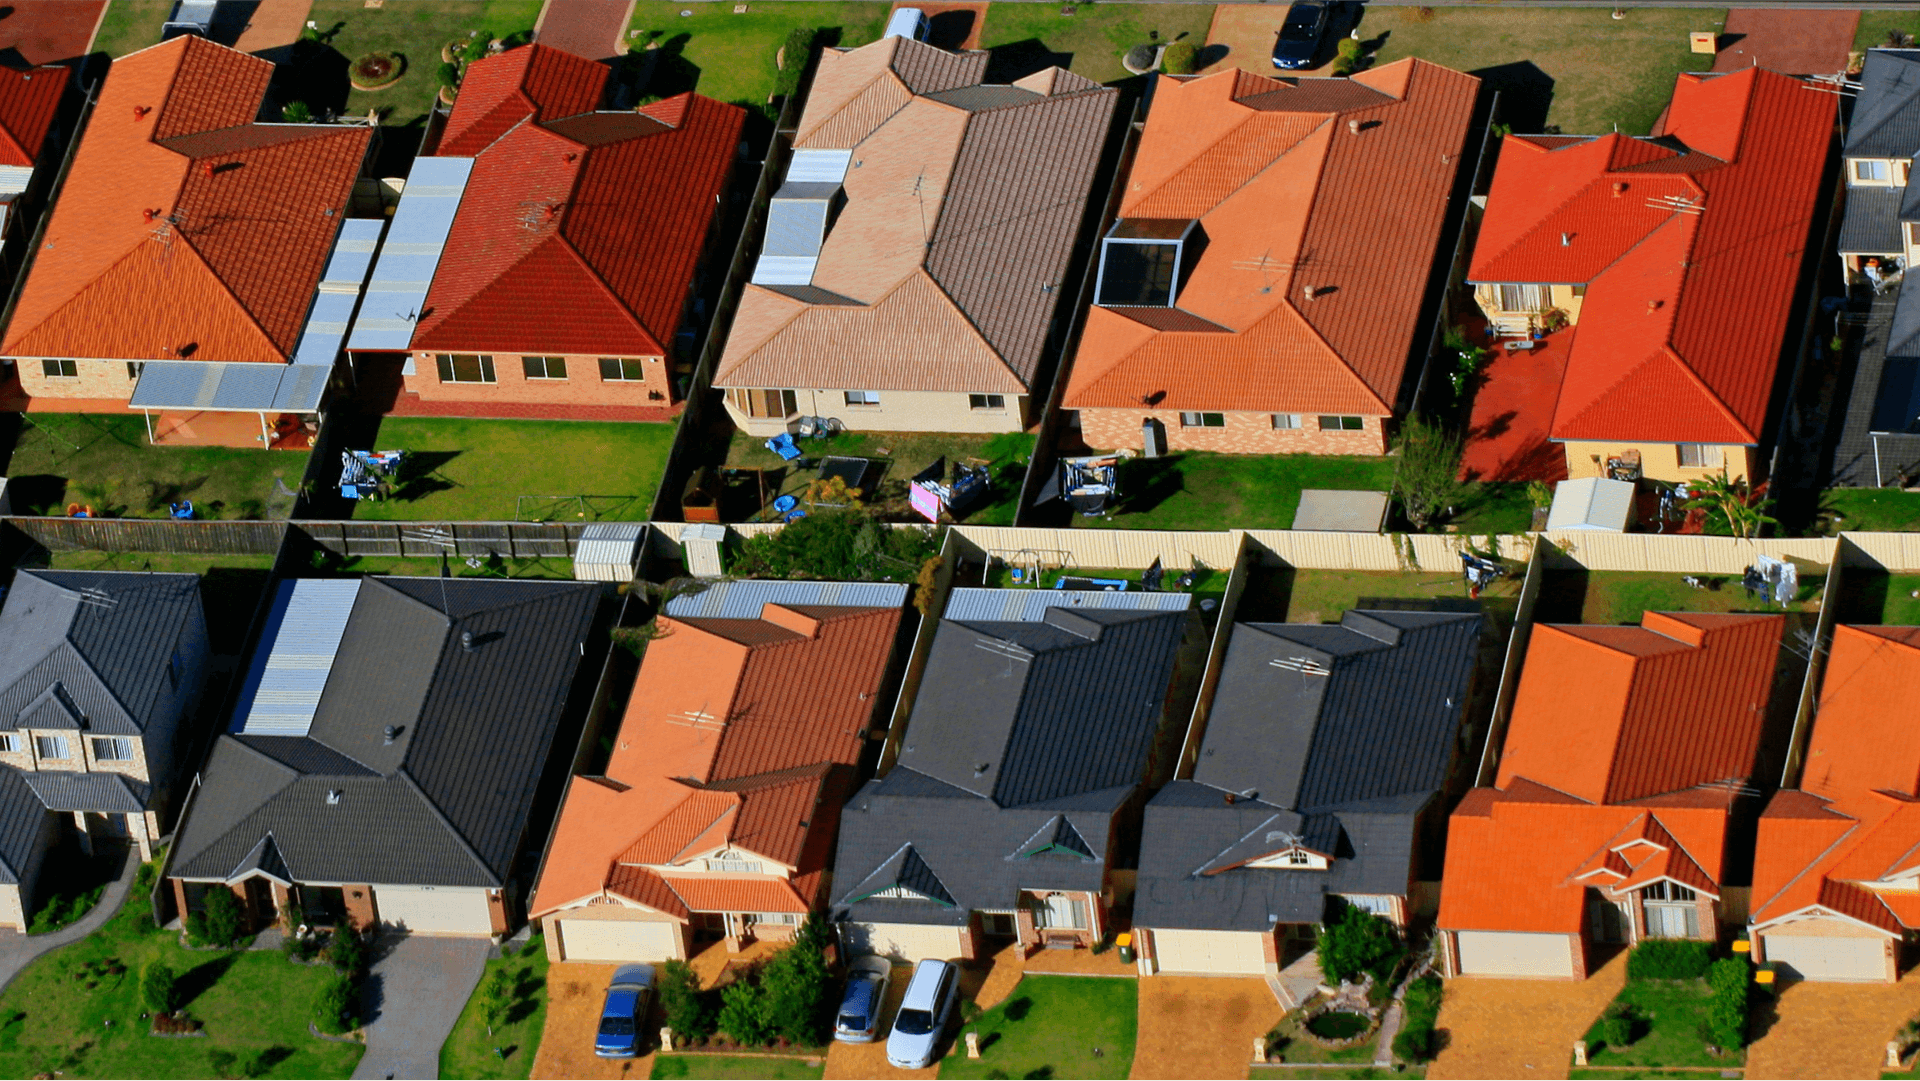 aerial view of suburban block with orange-roofed houses with green lawns